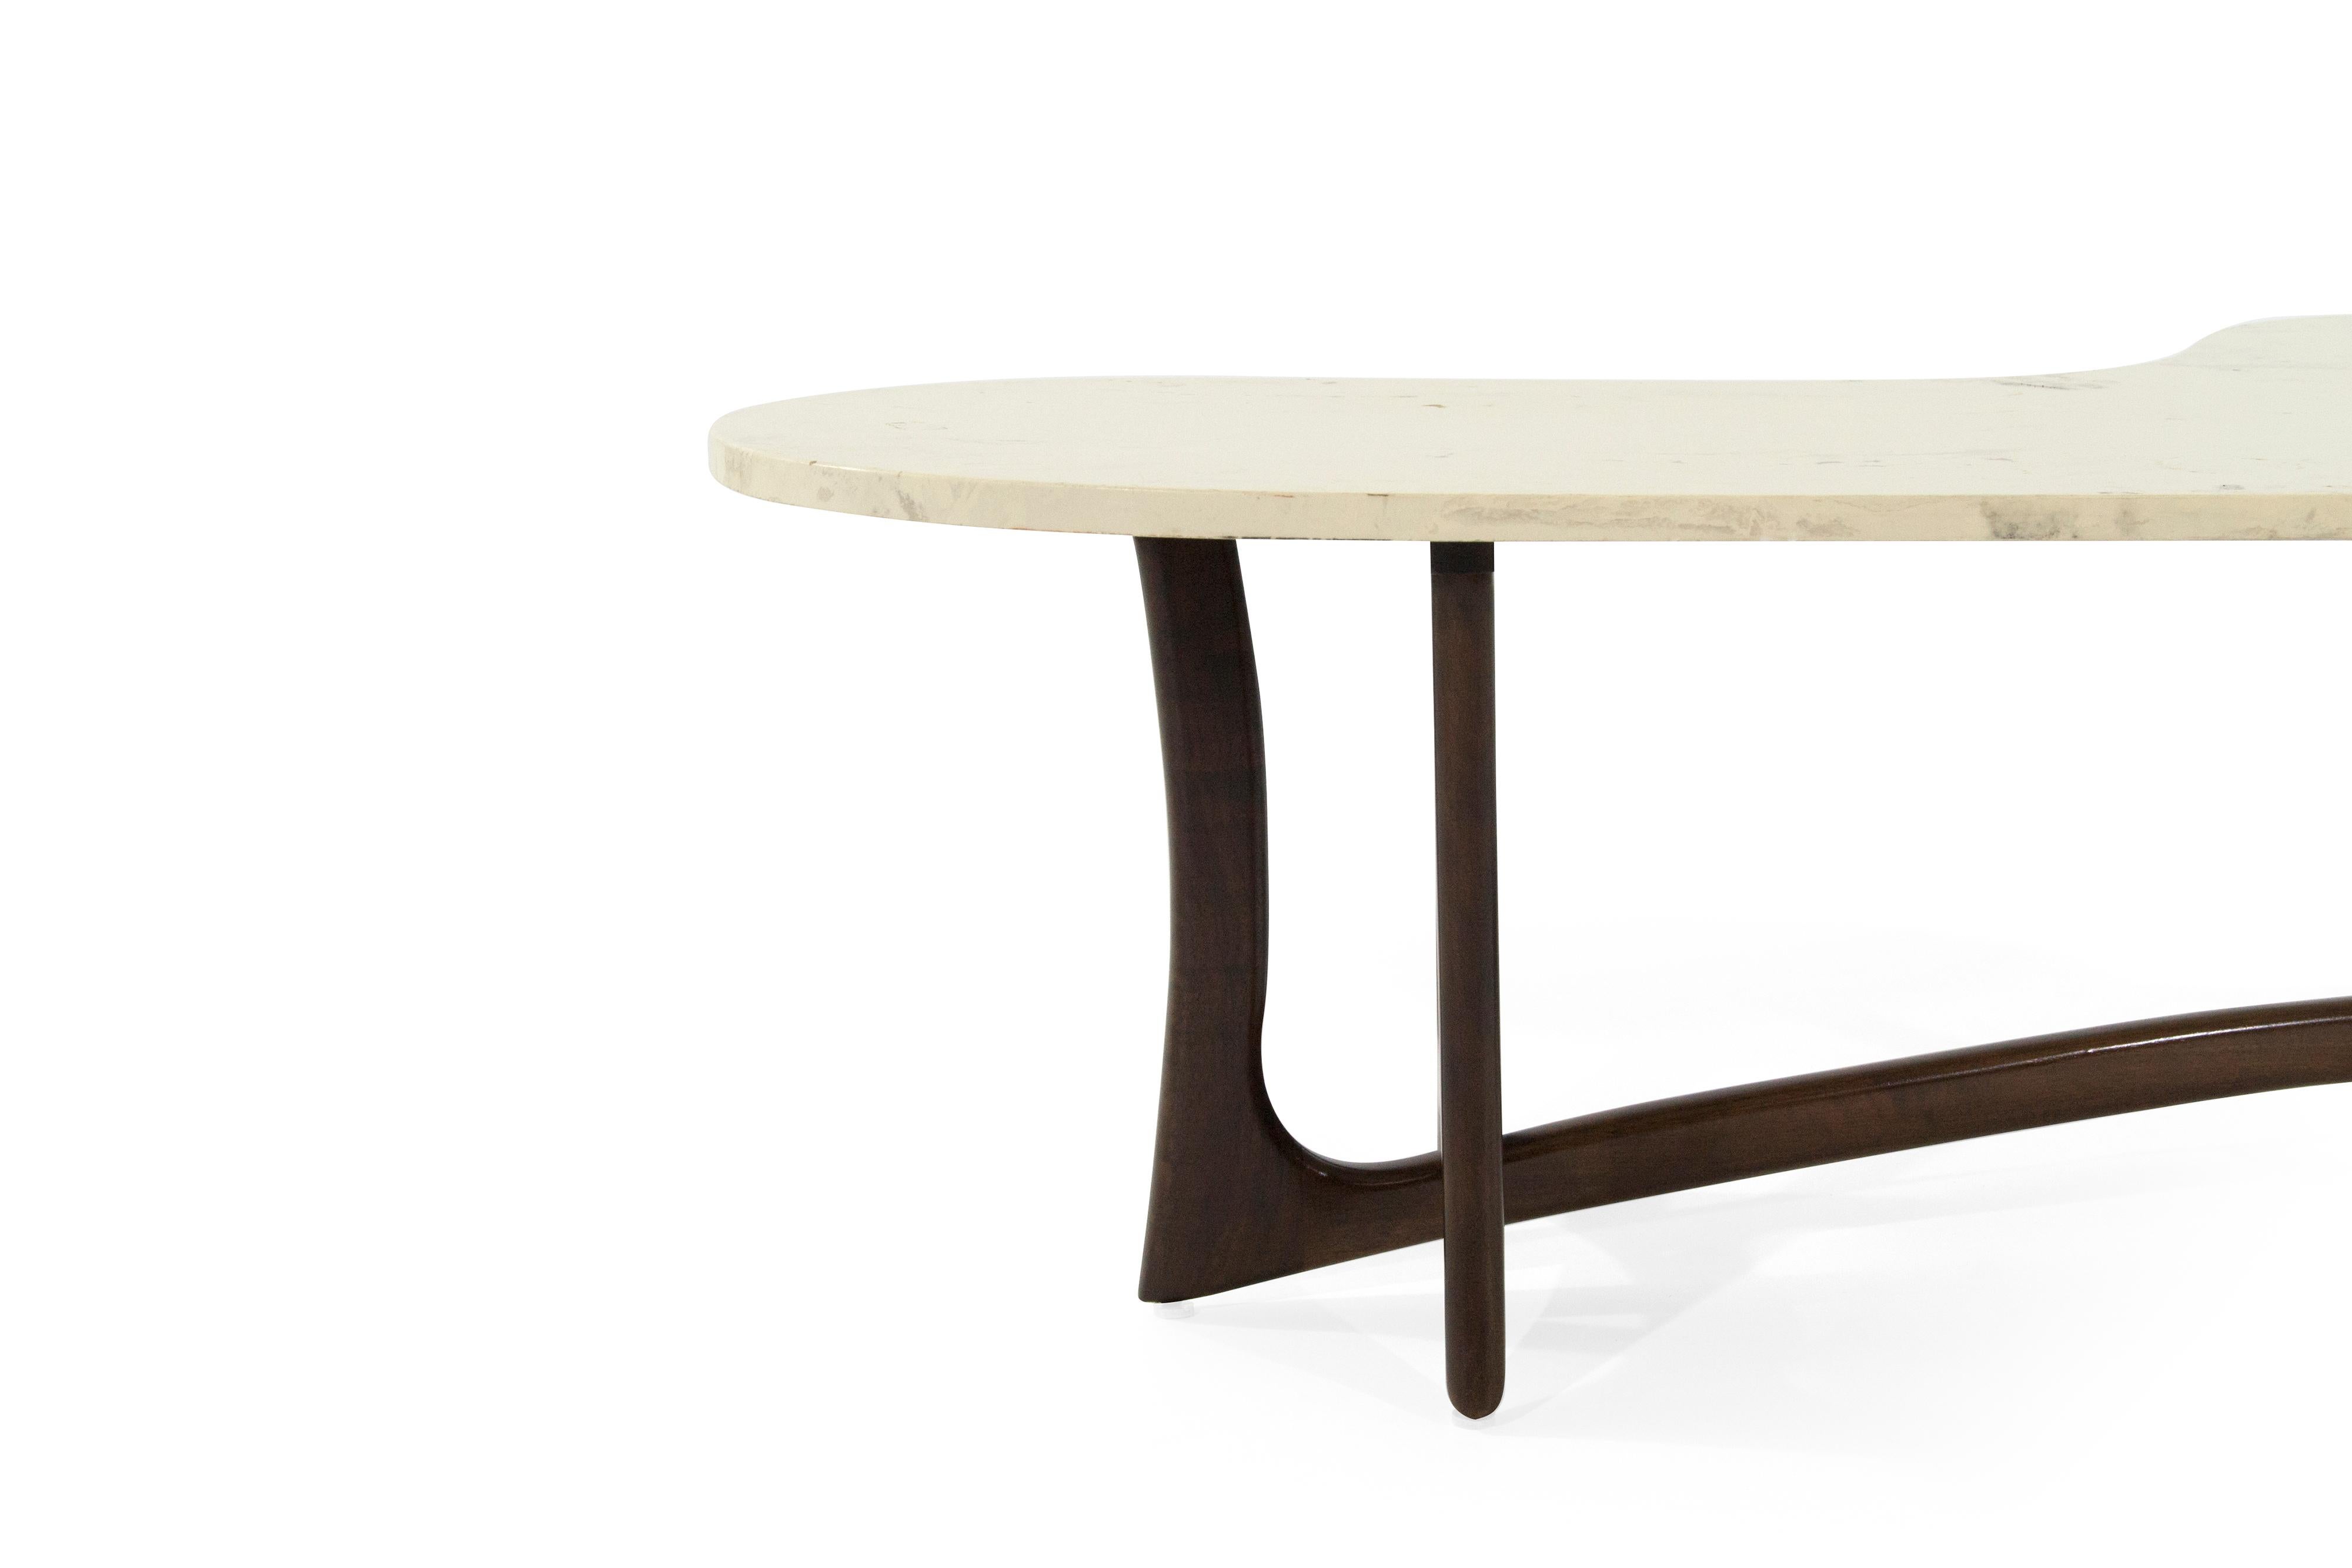 American Asymmetric Marble-Top Coffee Table by Adrian Pearsall